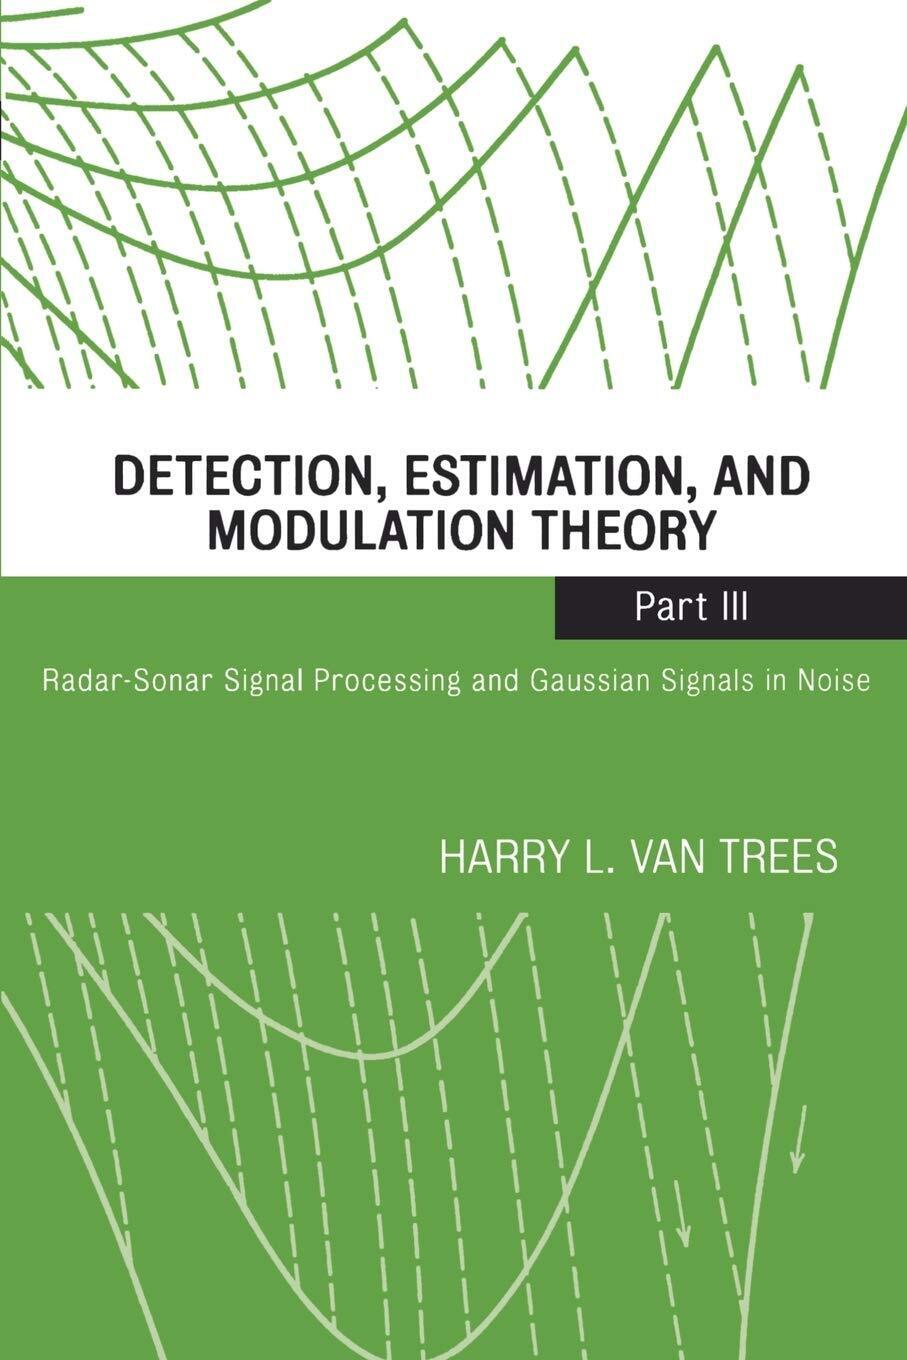 Detection, Estimation, and Modulation Theory Part III - Harry L. van Trees-2001 libro usato